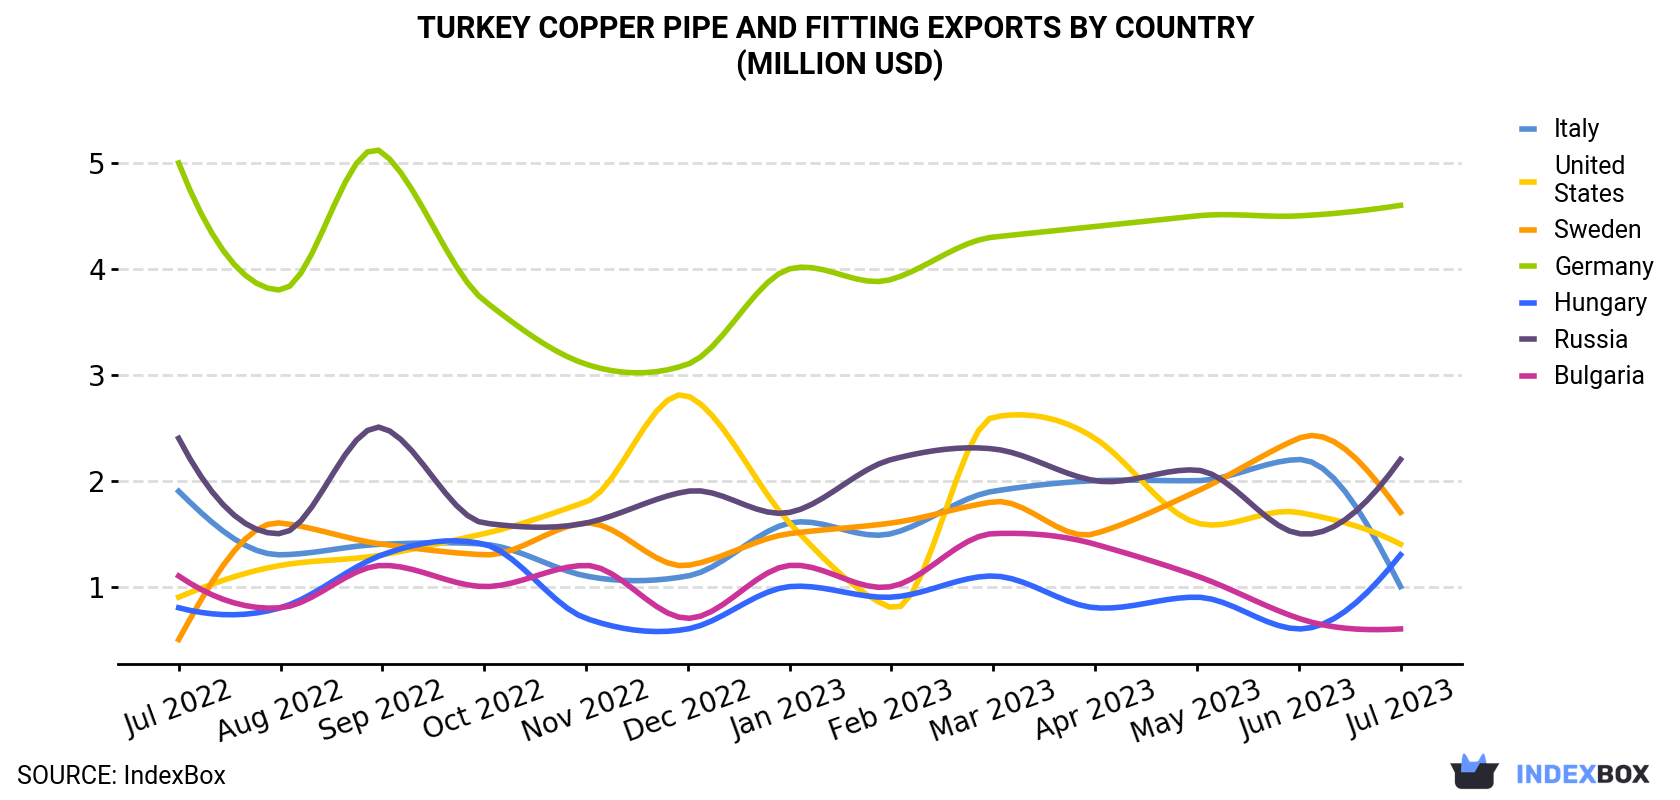 Turkey Copper Pipe And Fitting Exports By Country (Million USD)